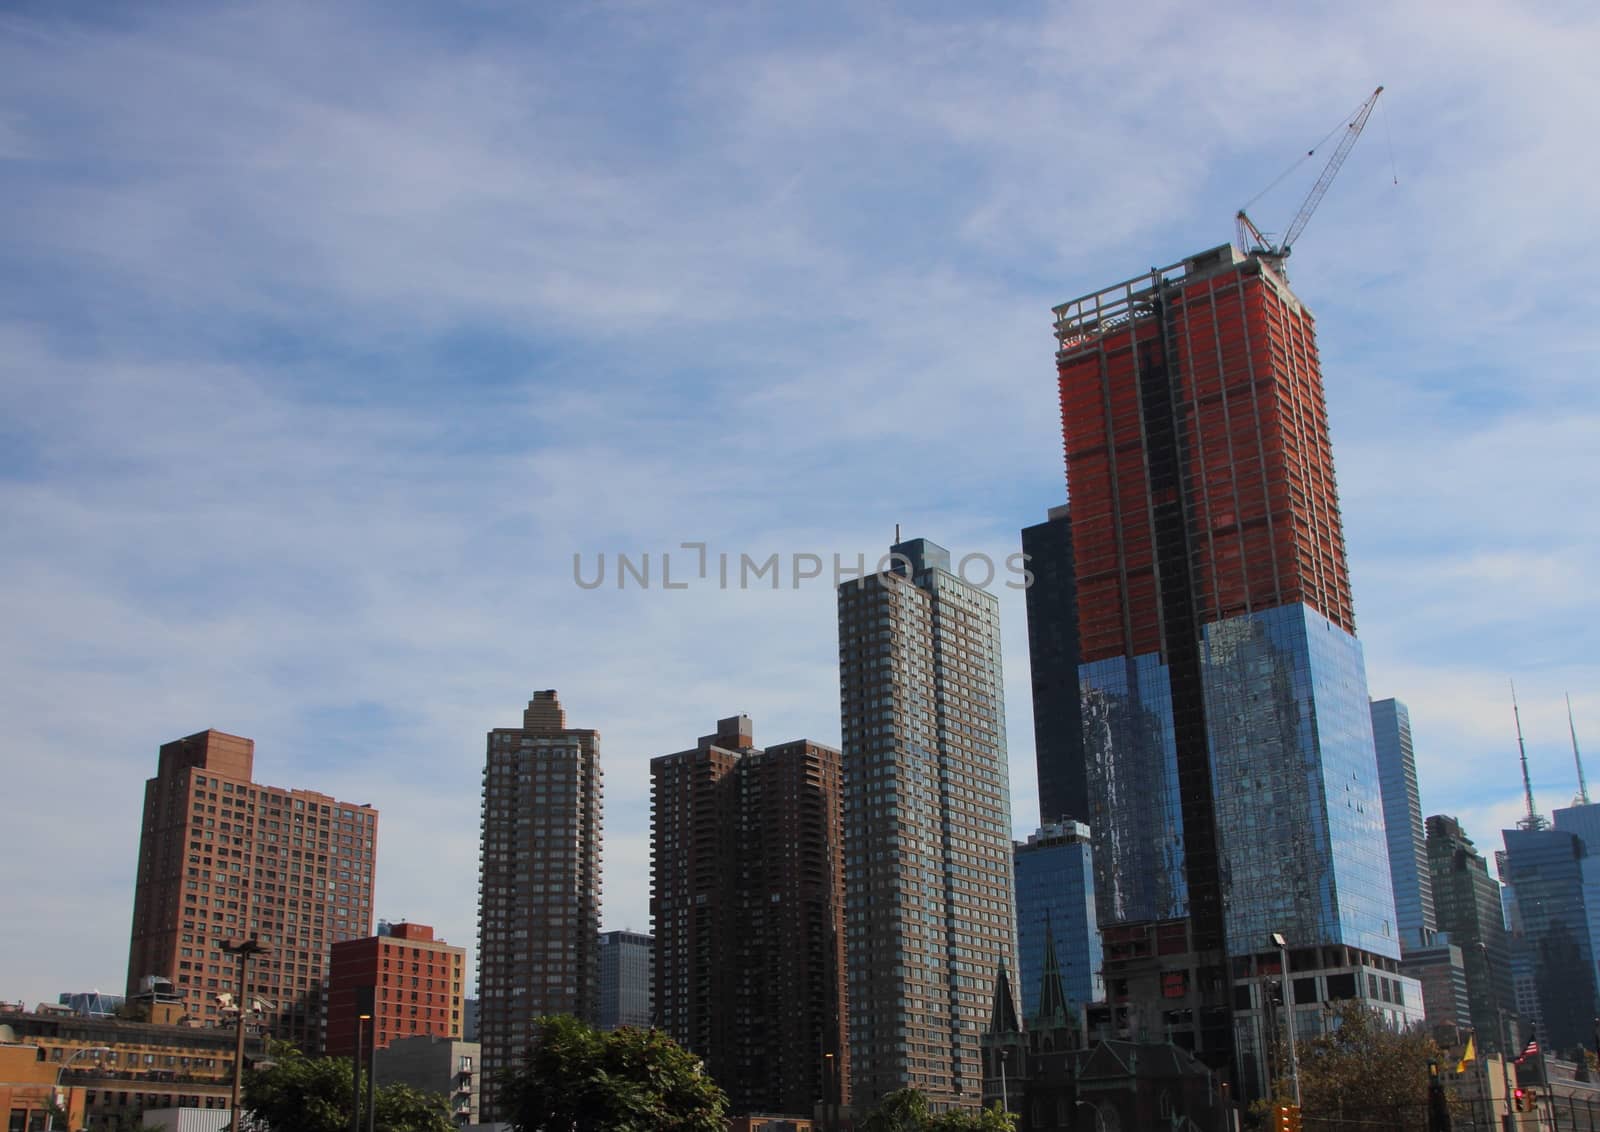 Skyscraper Landscape with Urban Building Site in New York by HoleInTheBox